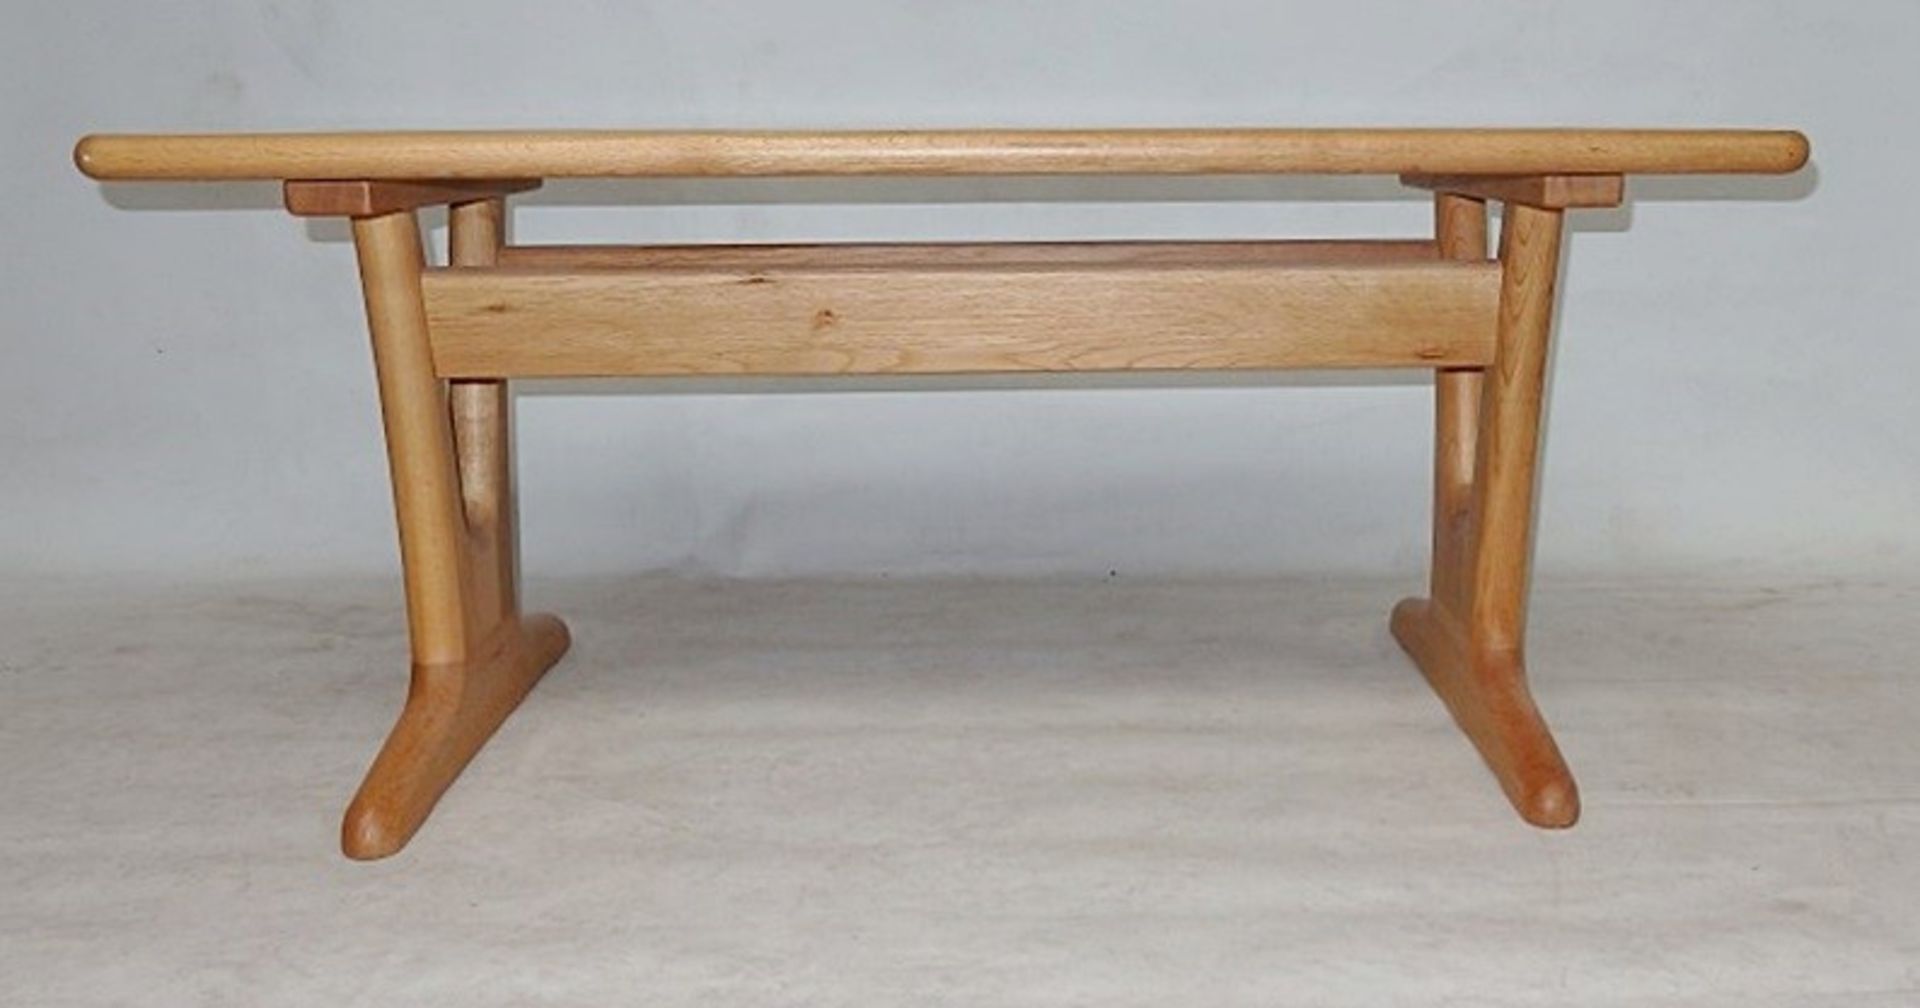 1 x Wooden Table With a Modern Curved Design - Dimensions: W120 x H52 x D60cm - Ref: DB037 - CL122 - - Image 3 of 6